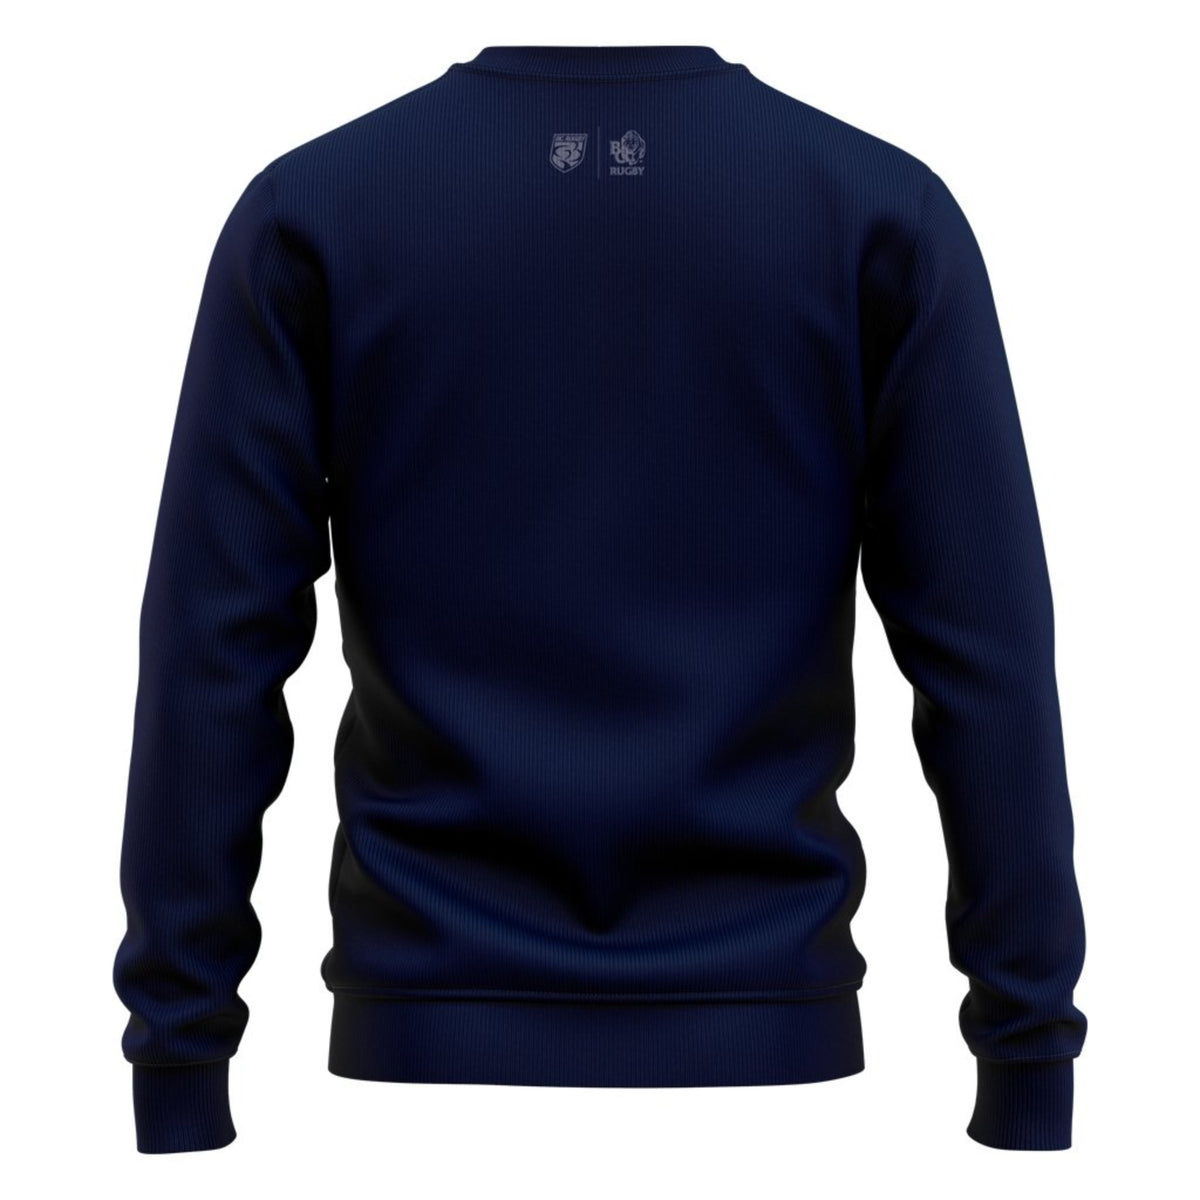 BC Rugby 2021 &quot;Small Logo Team&quot; Crew Neck Sweater - Adult Unisex - www.therugbyshop.com www.therugbyshop.com XIX Brands HOODIES BC Rugby 2021 &quot;Small Logo Team&quot; Crew Neck Sweater - Adult Unisex